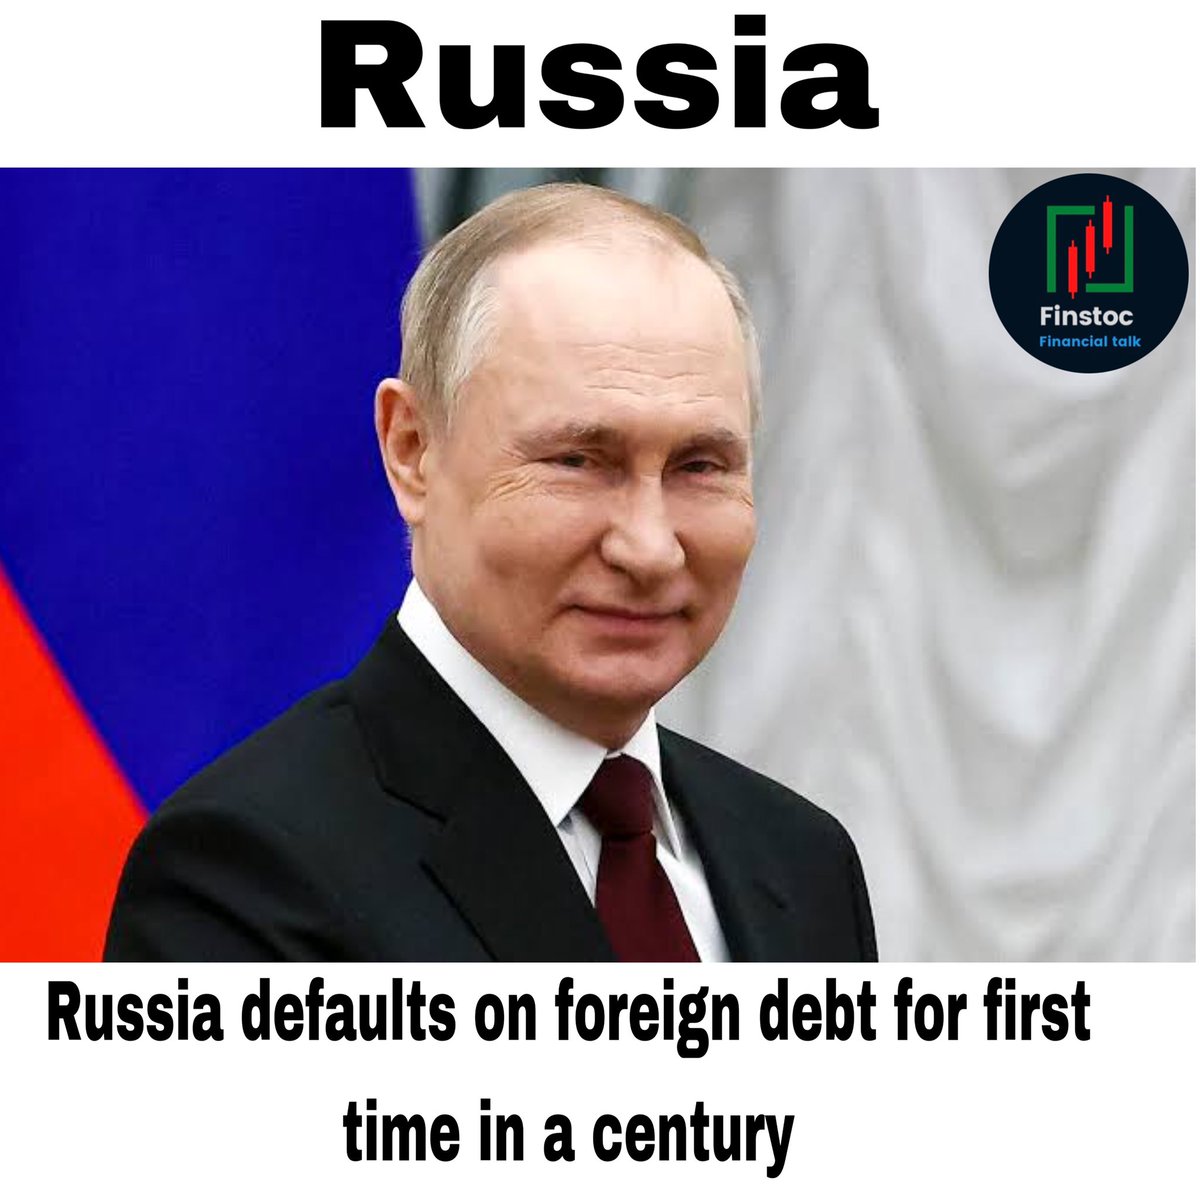 More interesting update follow @finstoc1 # . # . During Russia’s financial crisis and ruble collapse of 1998, President Boris Yeltsin’s government defaulted on $40 billion of its local debt. #russia #india #usa #worldeconomicforum #imf #global200 #britain #america #putin